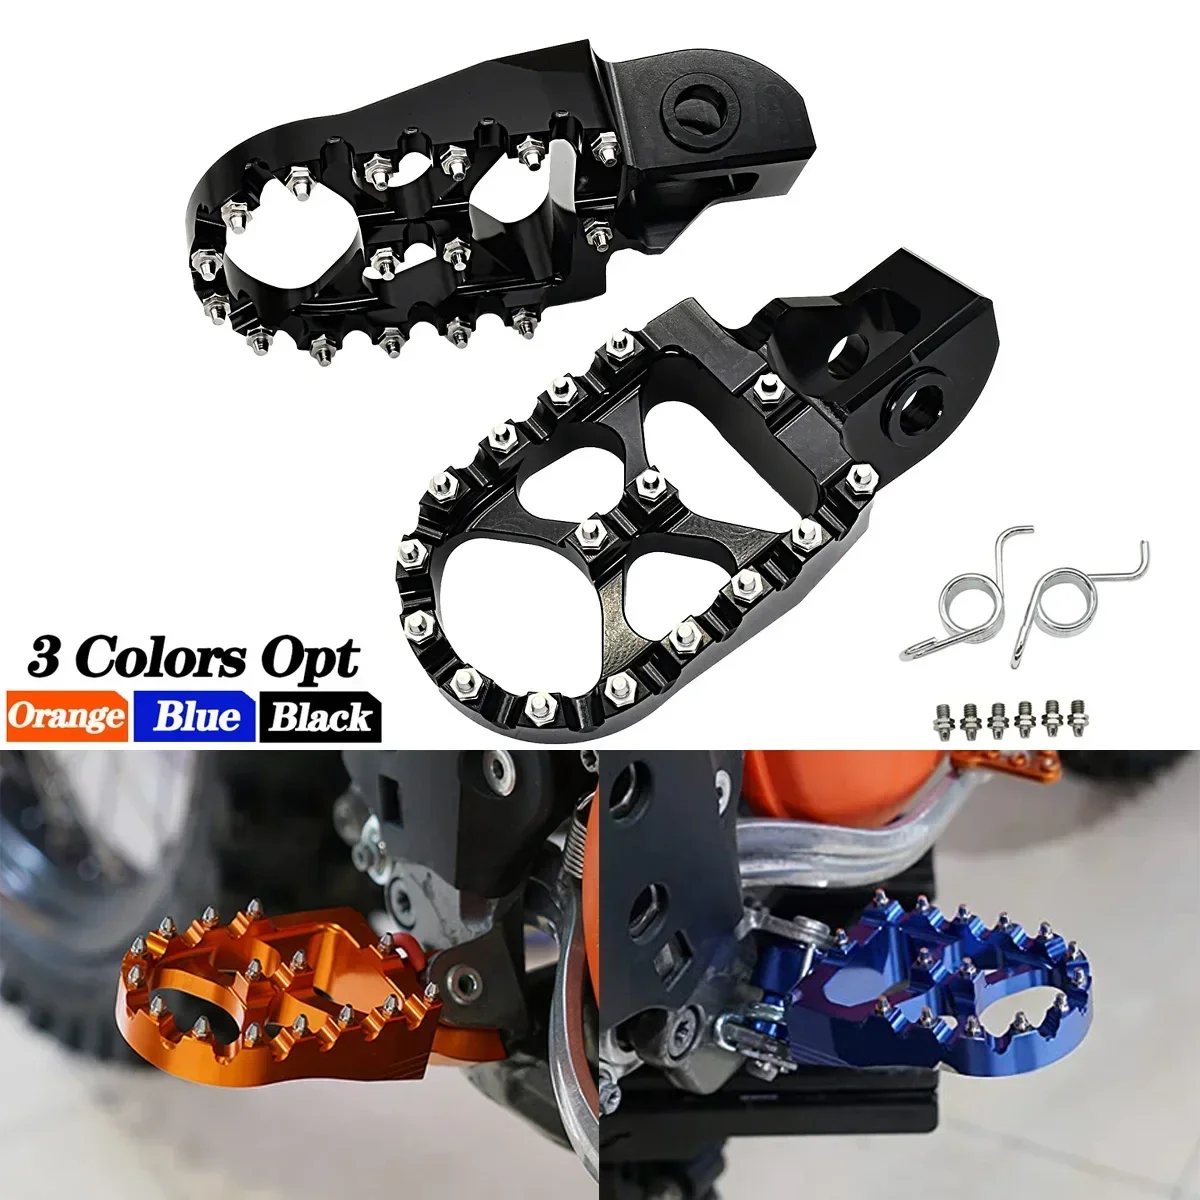 Motorcycle Accessories Foot Peg Footrest Footpeg Pedals For GasGas MC MC... - $29.35